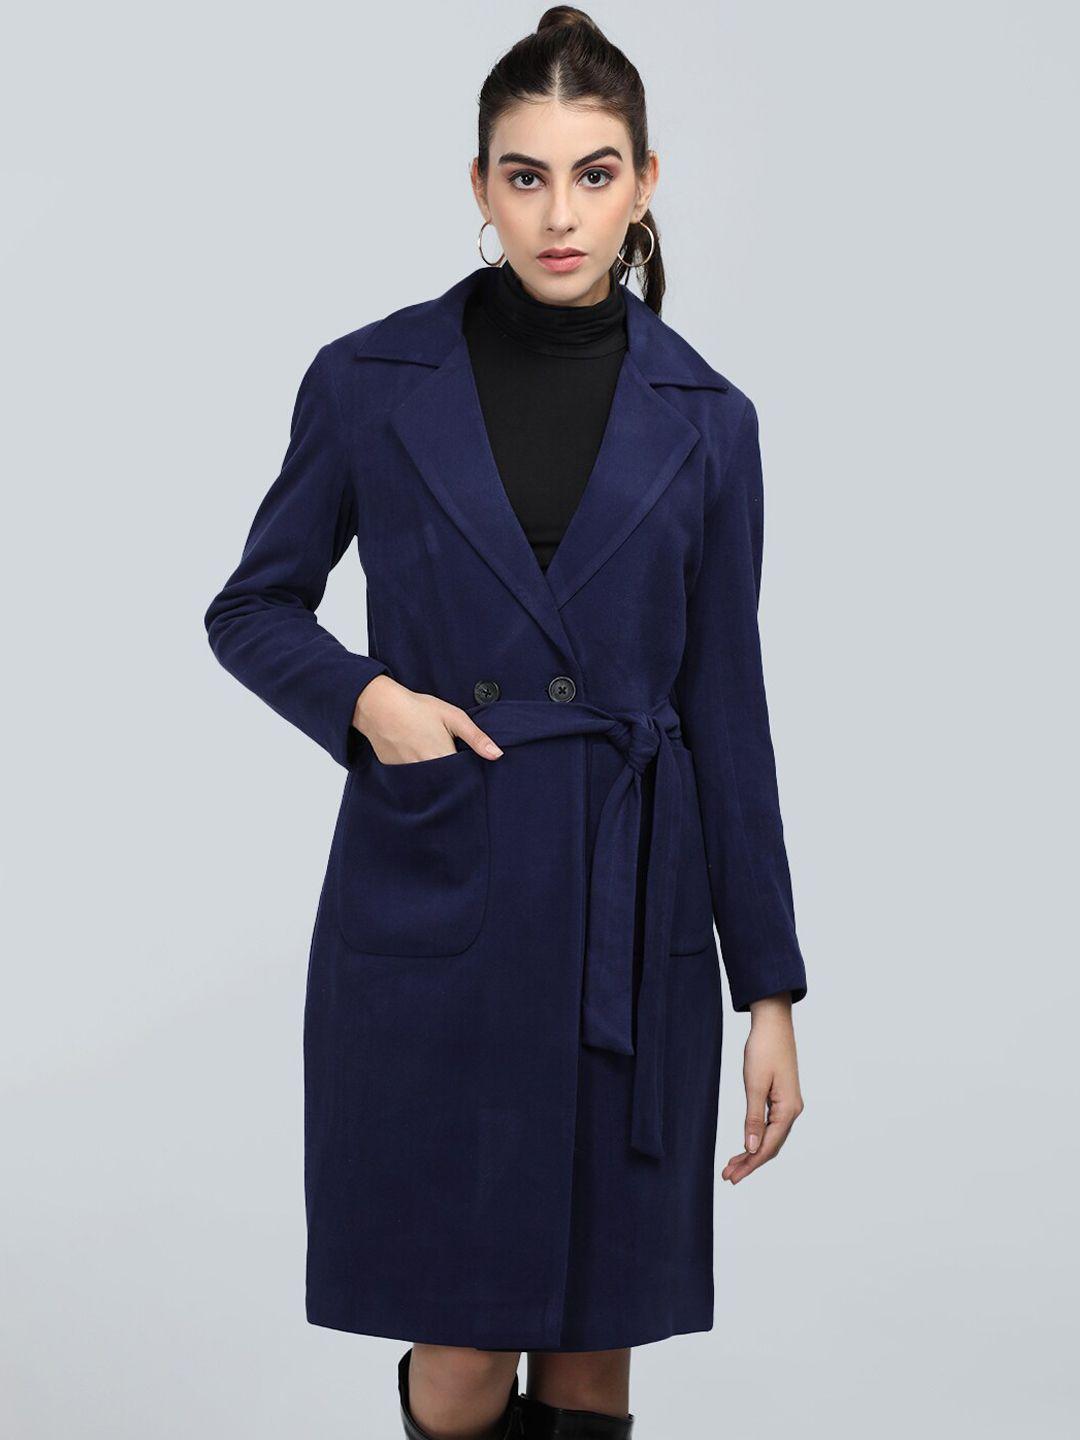 chkokko double breasted woollen trench coats